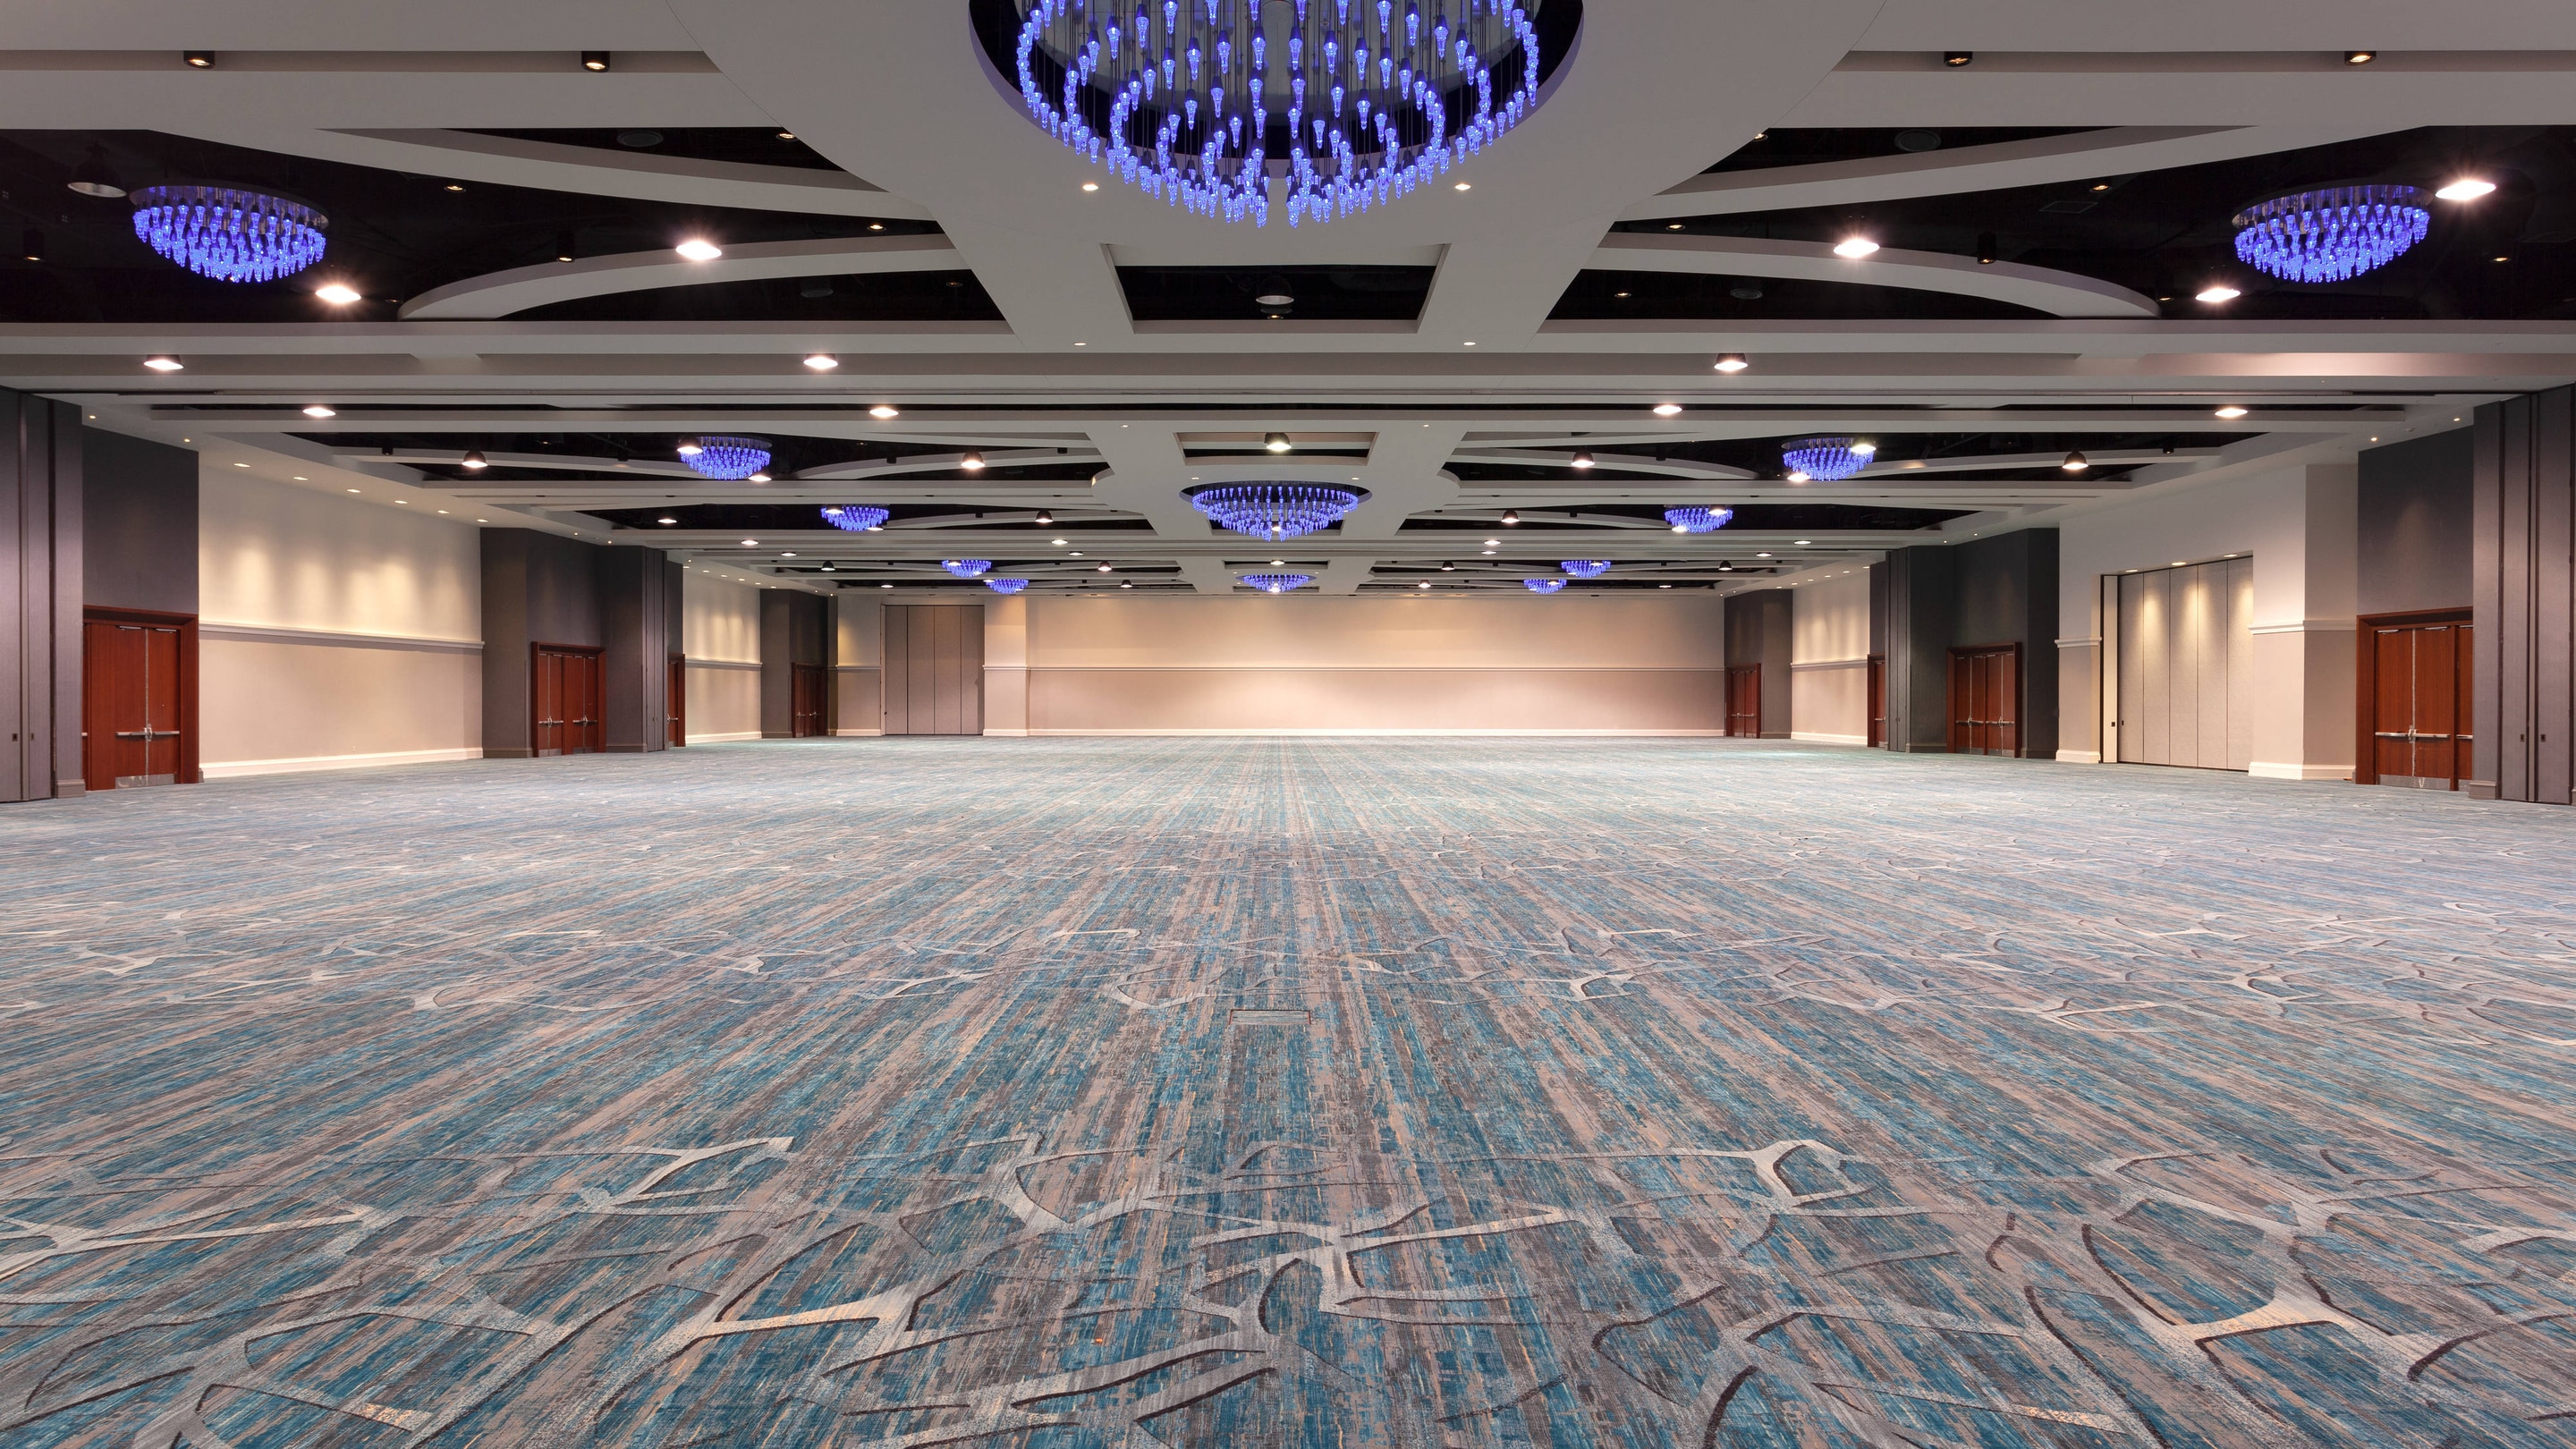 Large empty ballroom with blue lights above.